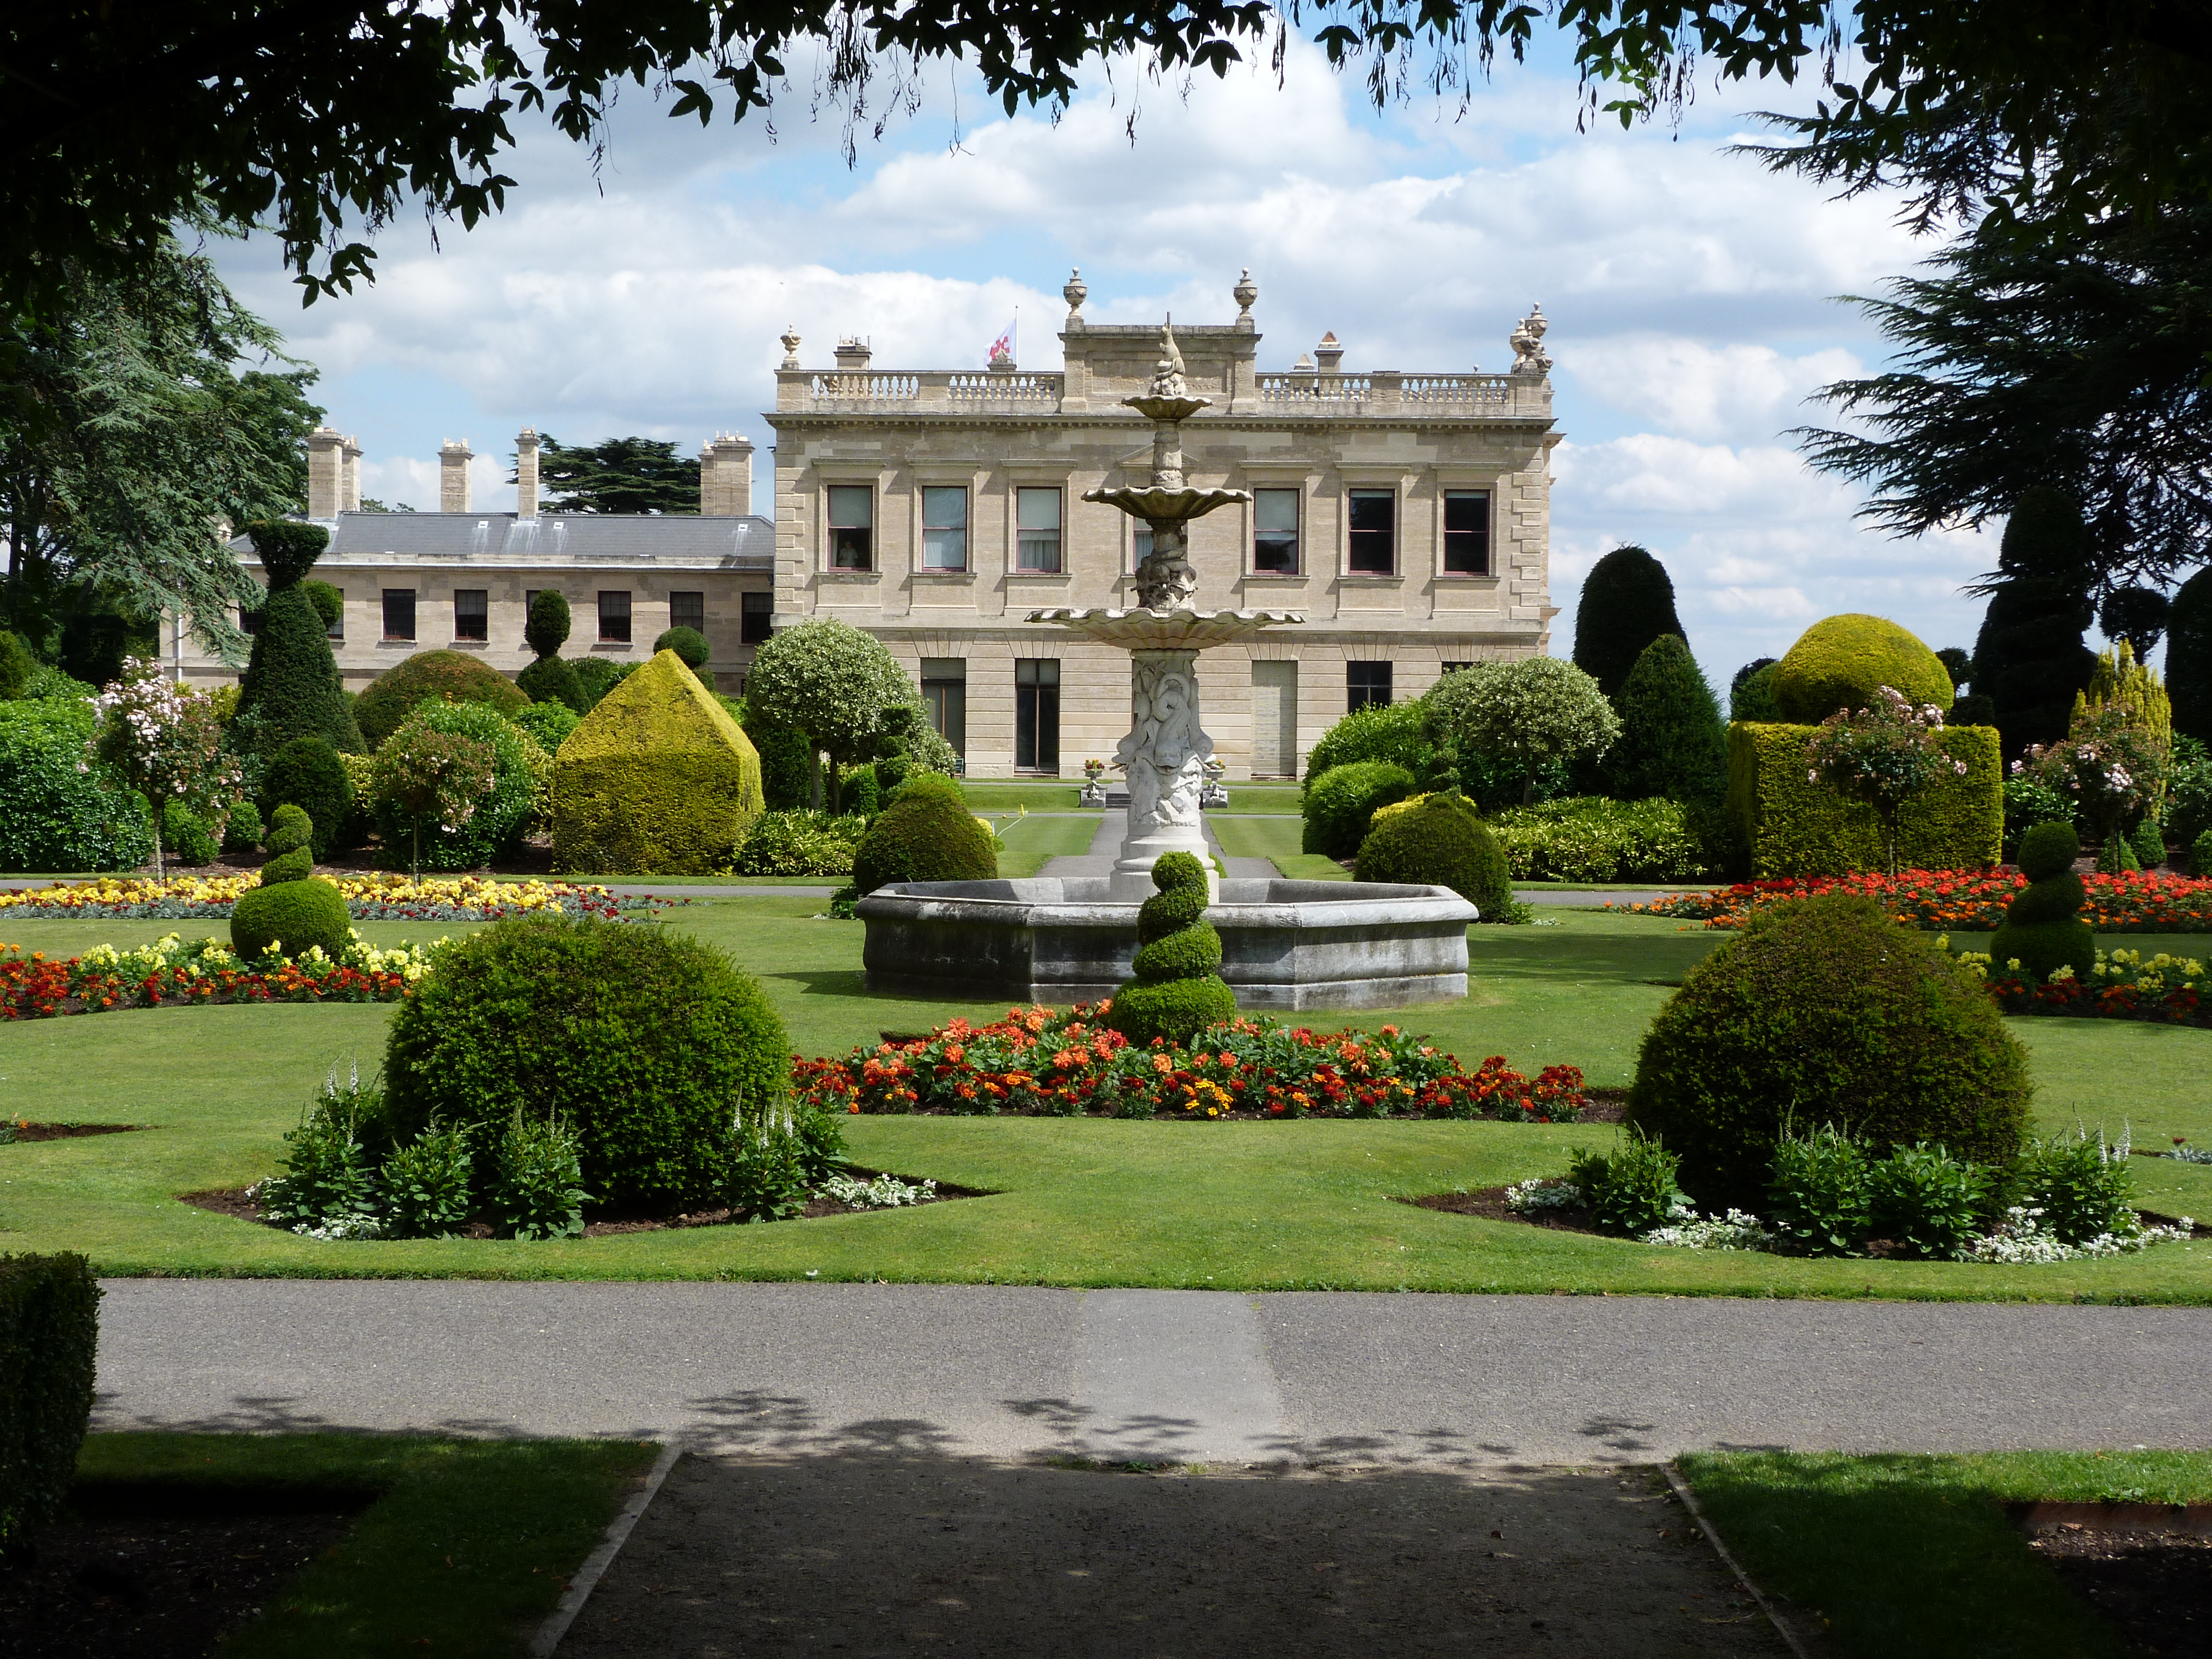 Brodsworth House and Garden